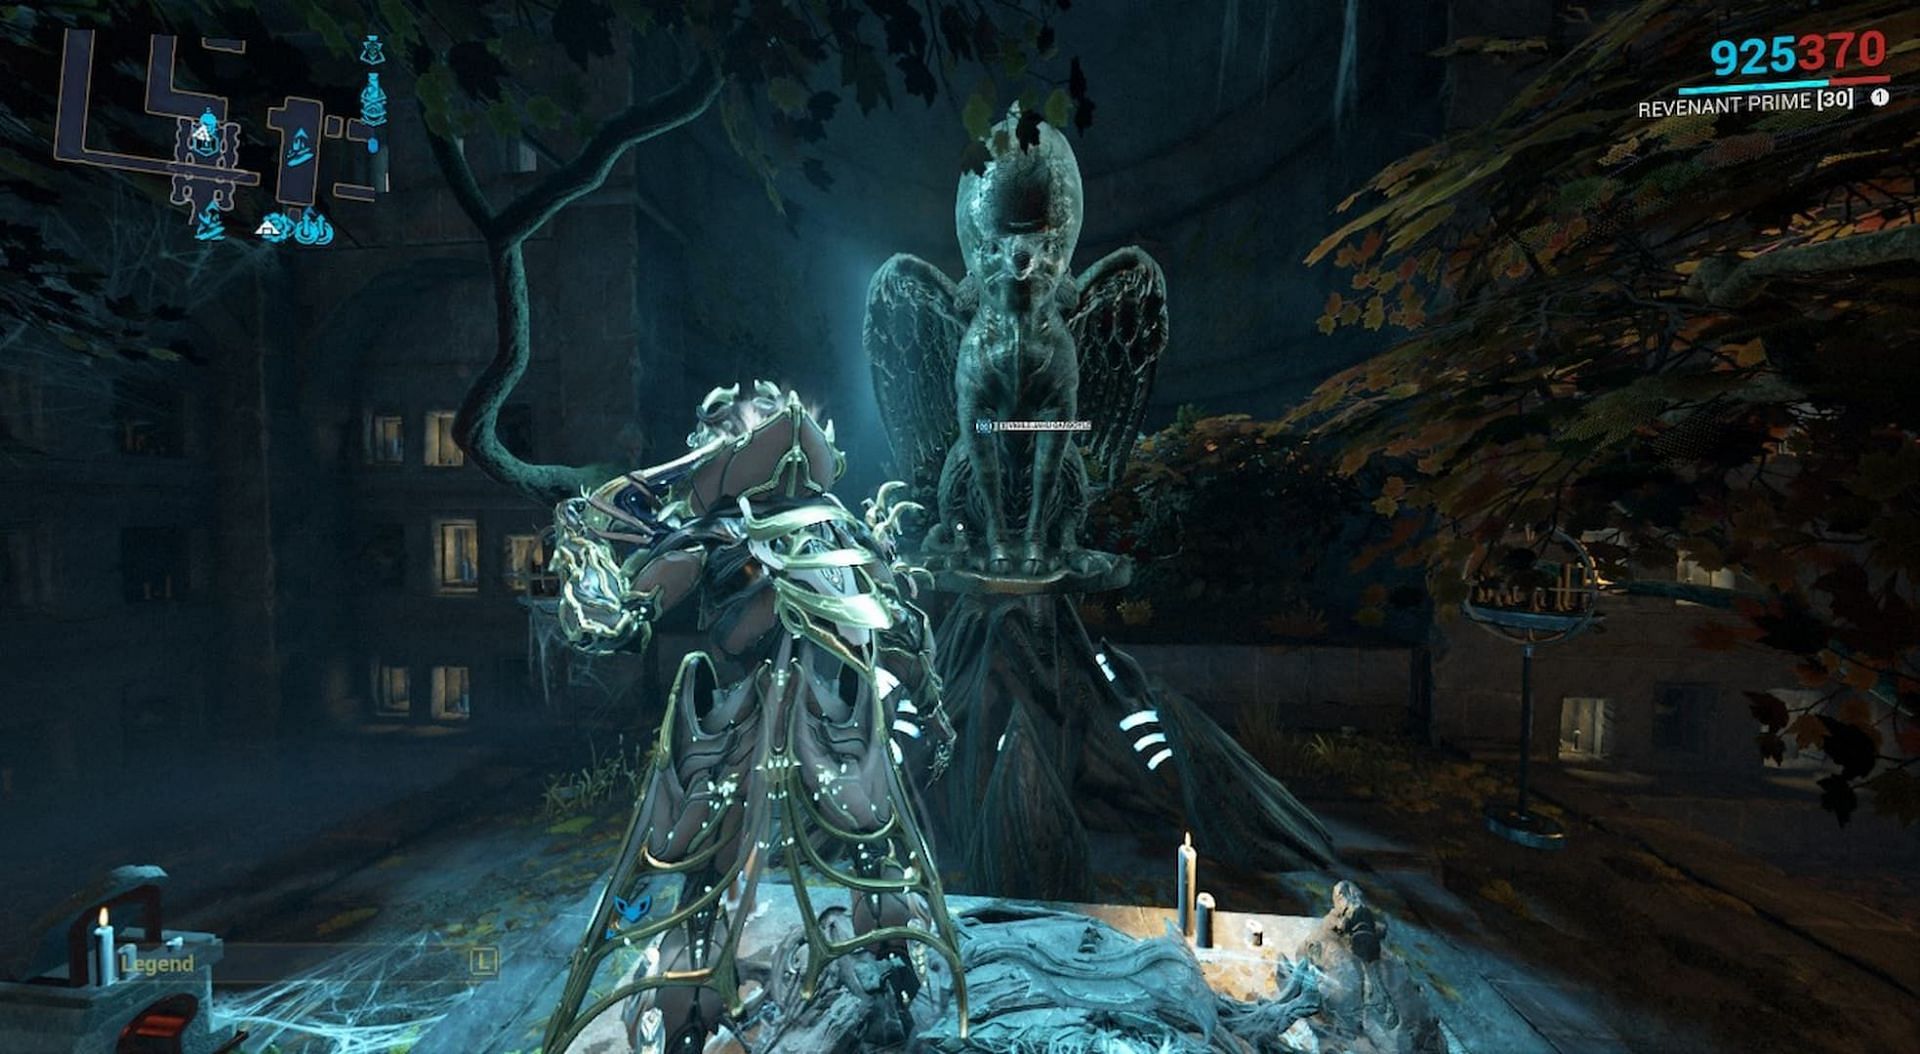 Interact with the Gargoyle Statue in your Dojo to get rewards or contribute Curses of Knowledge (Image via Digital Extremes)